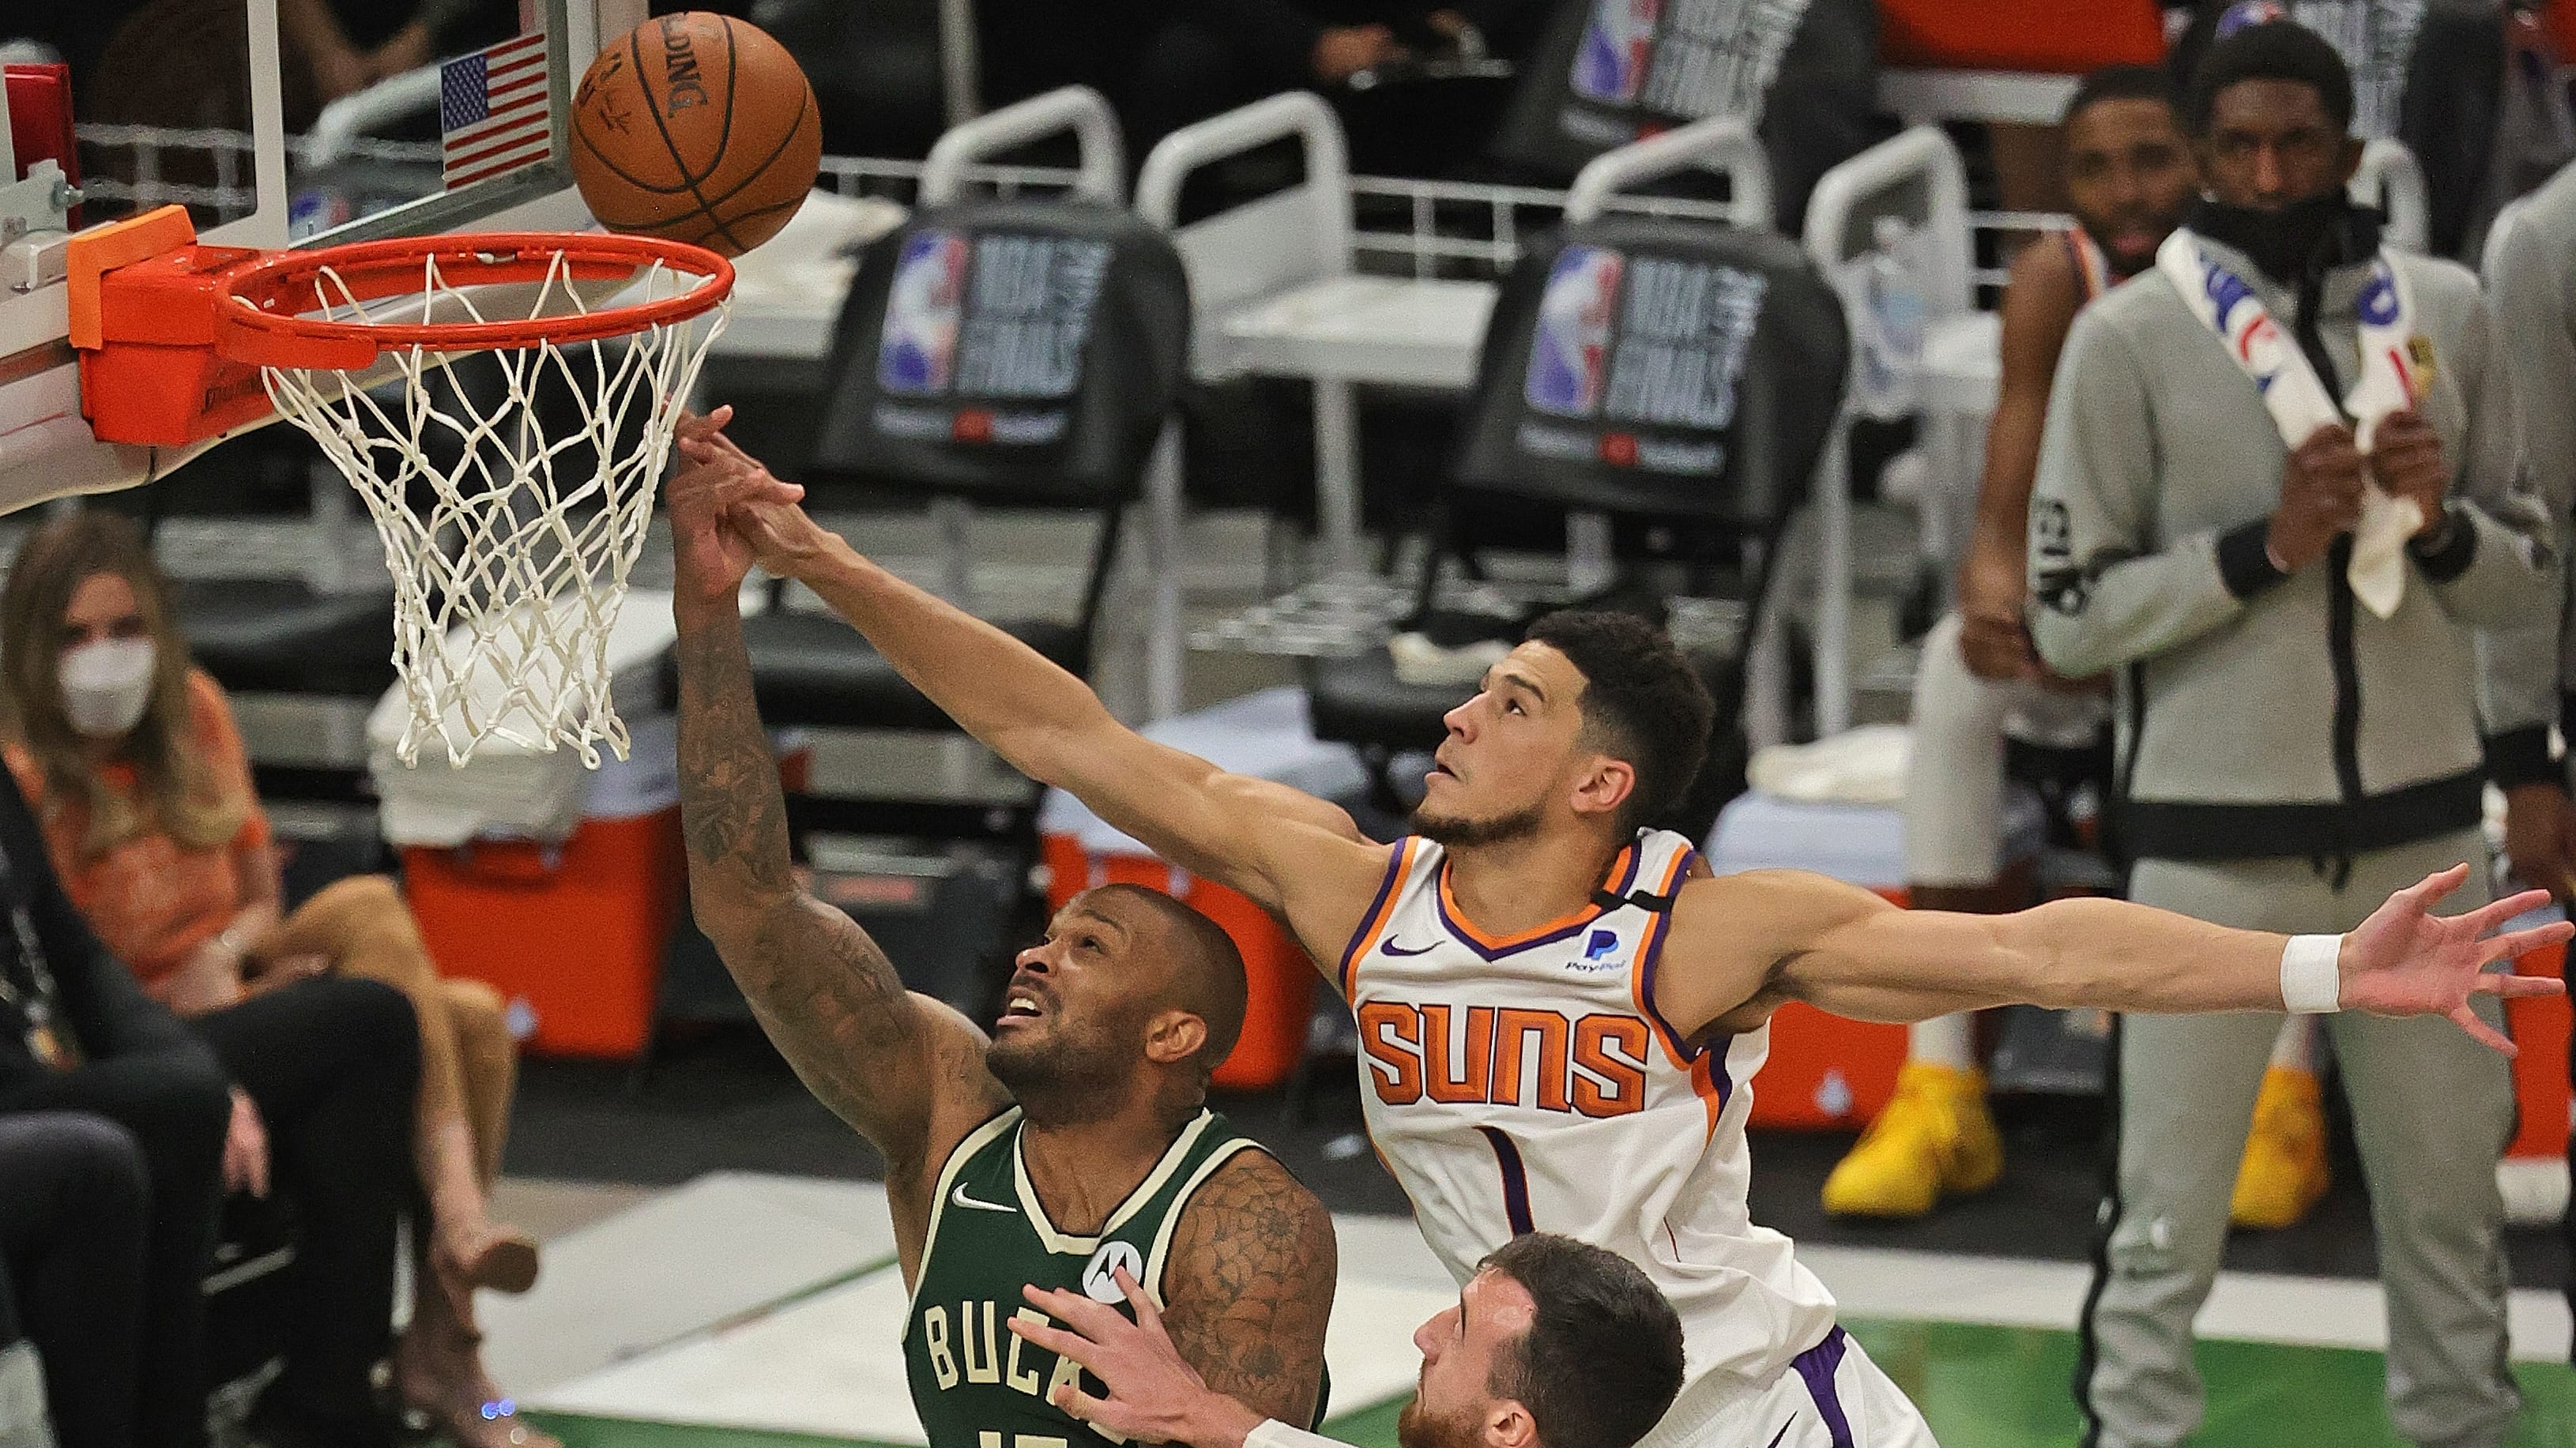 When Is Game 5 of the NBA Finals? Date, Time, TV Schedule for Bucks vs Suns